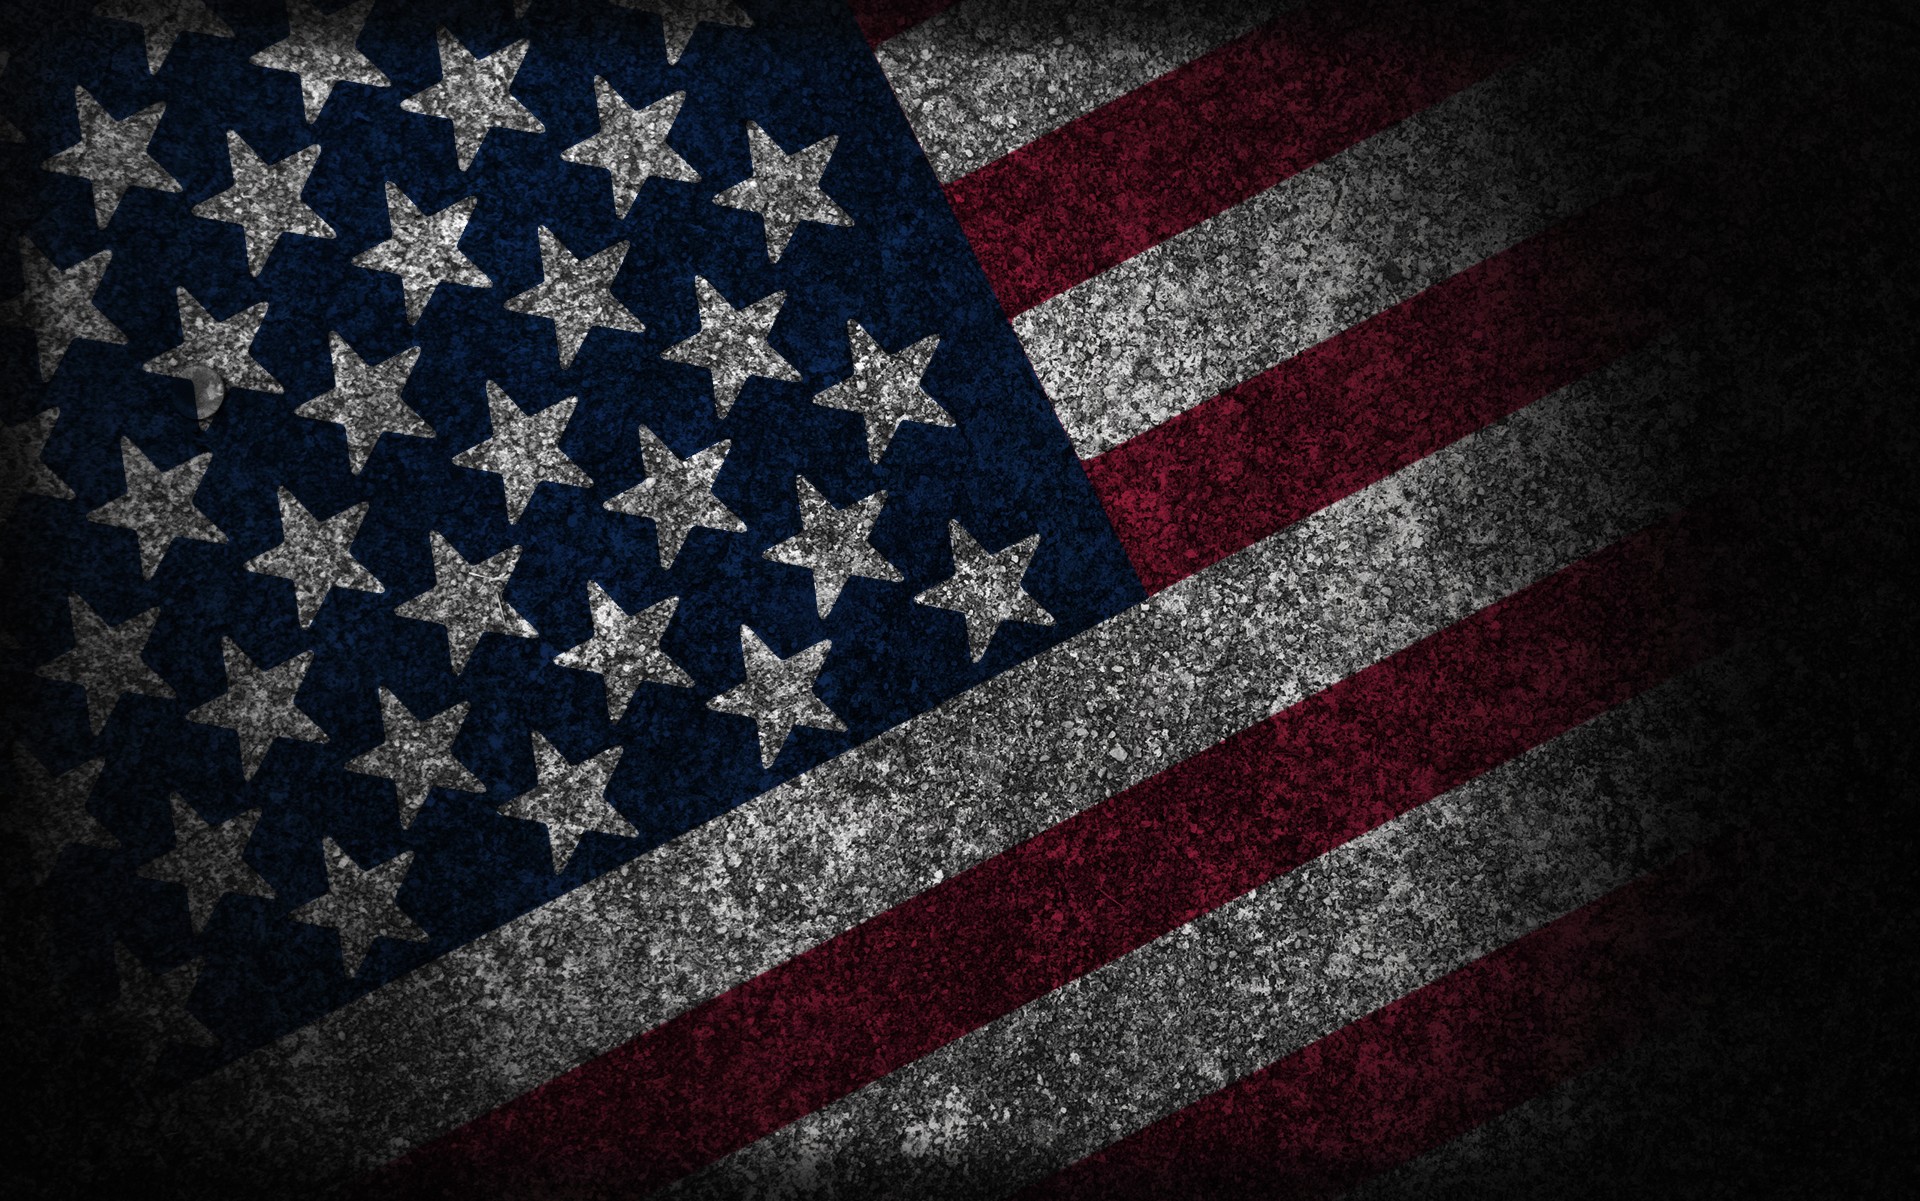 Rebel Flag wallpaper ·① Download free stunning HD backgrounds for desktop computers and